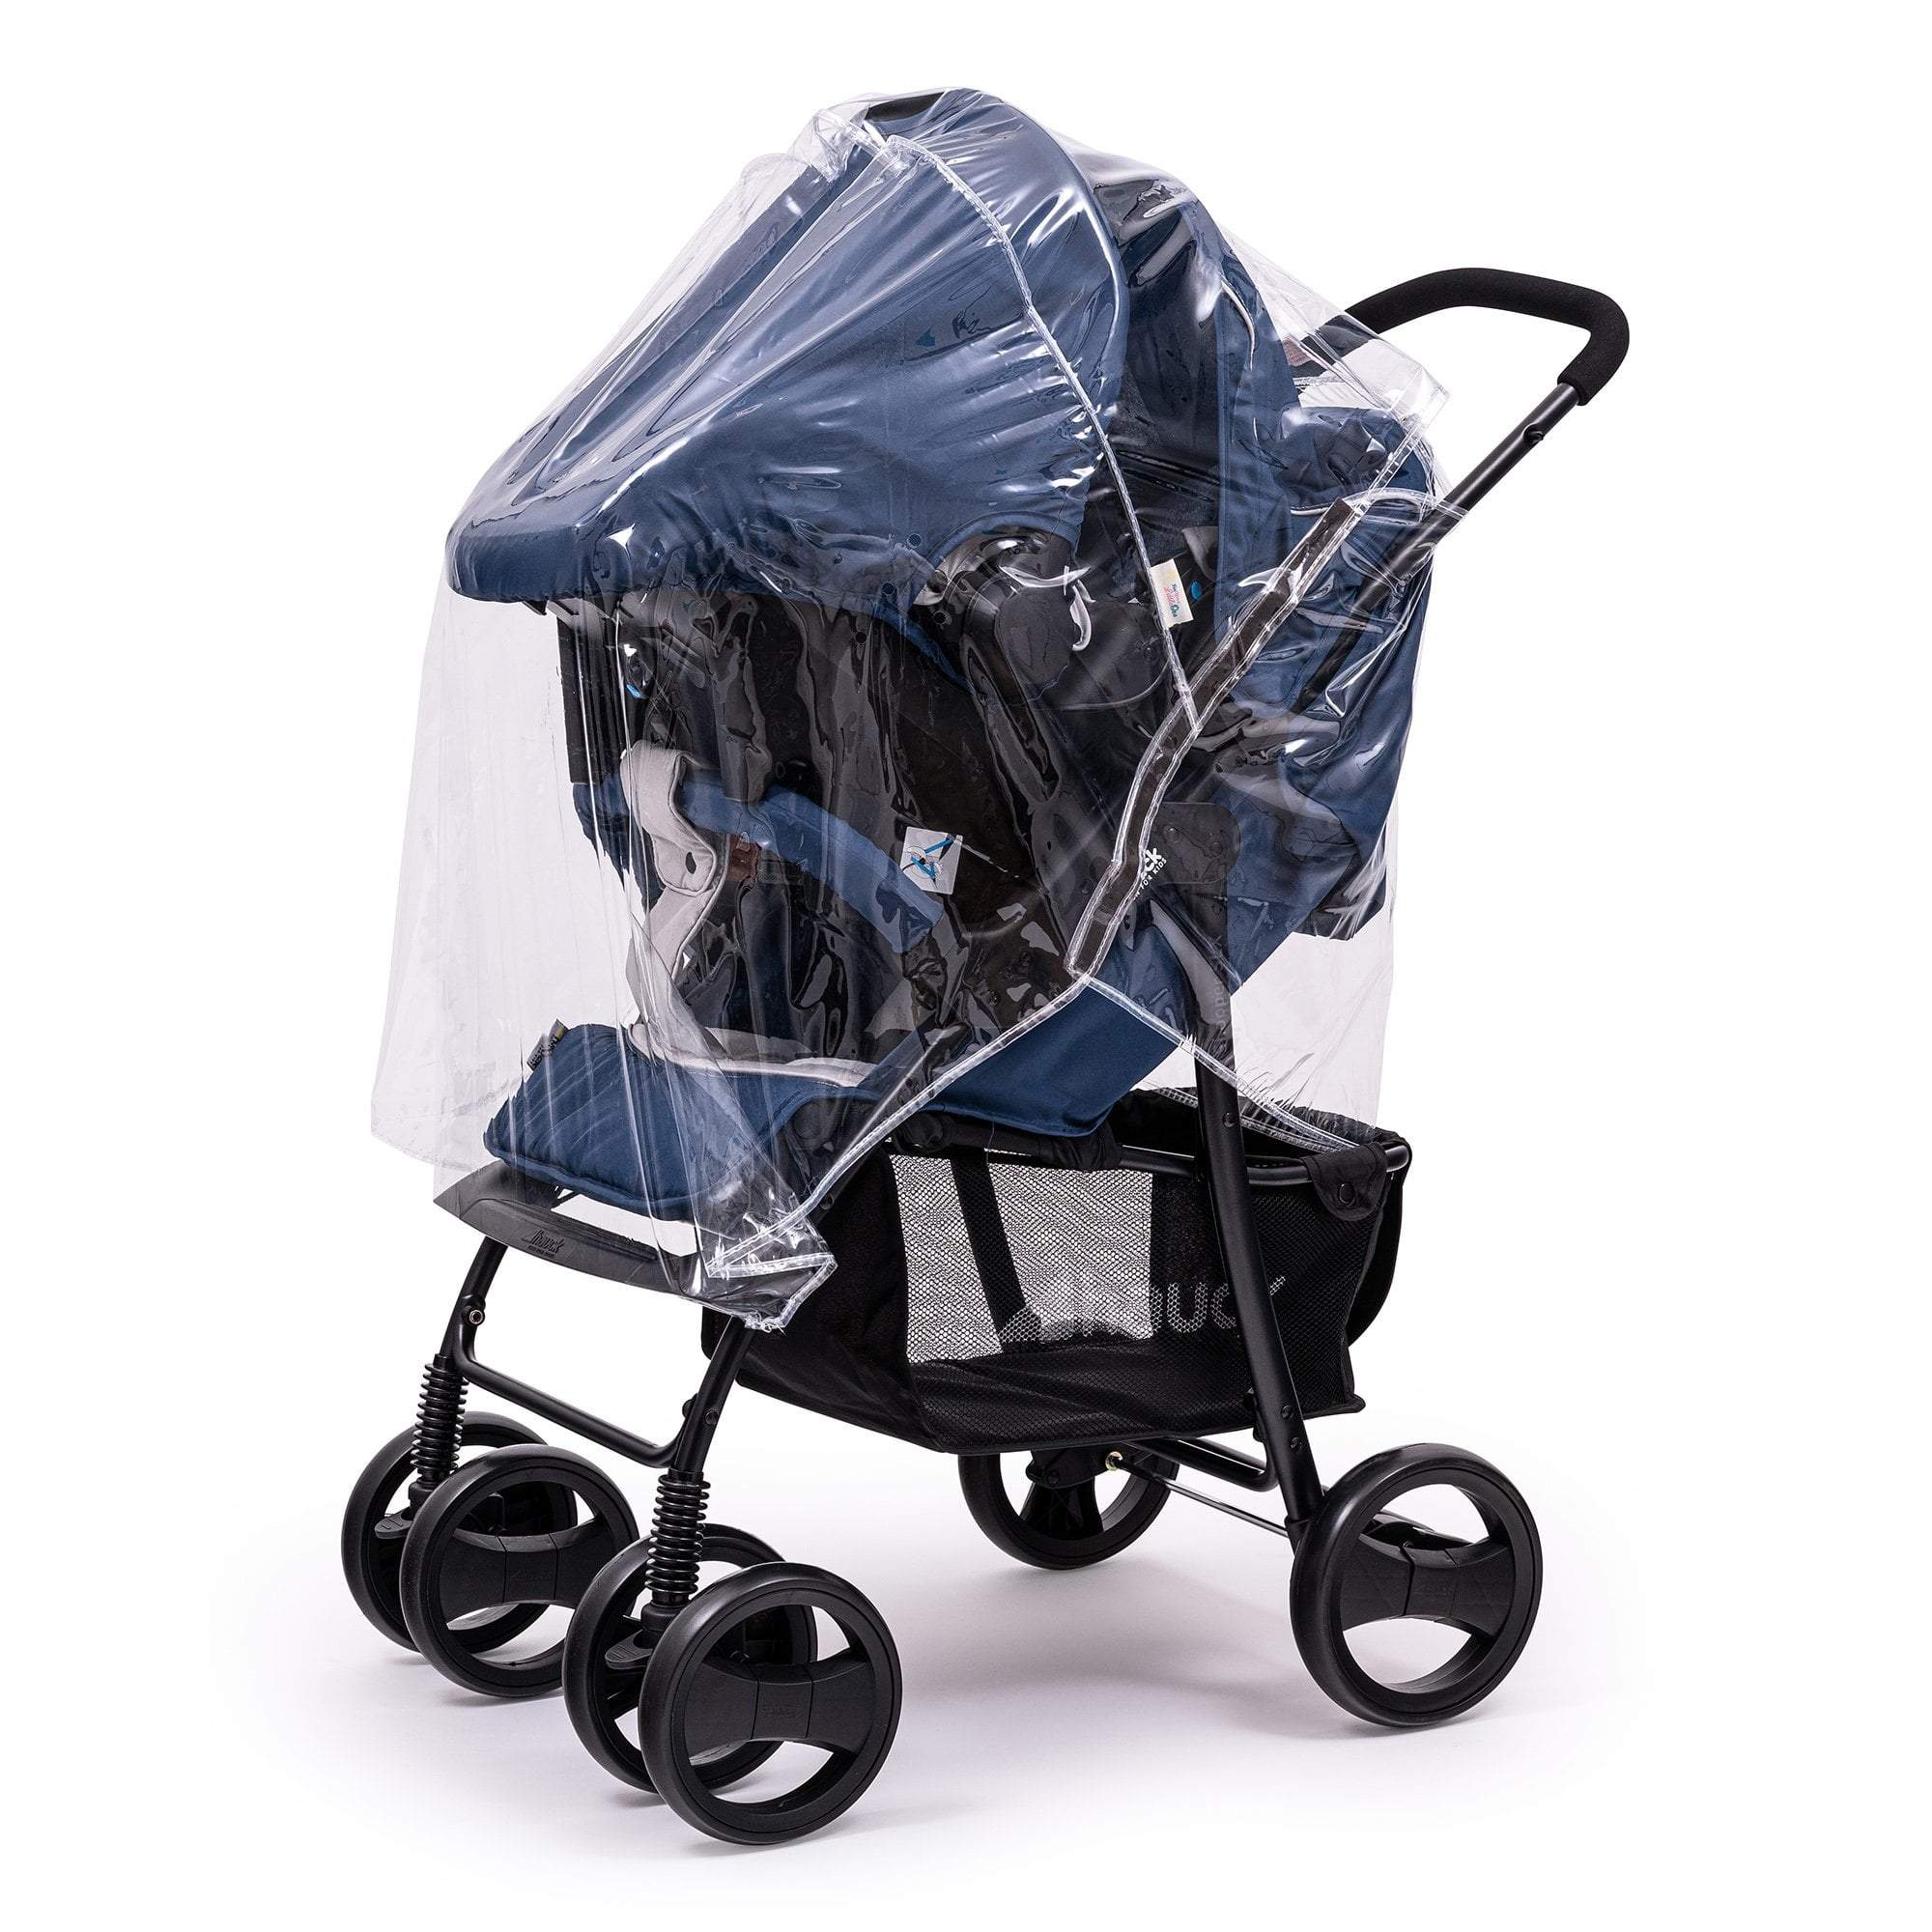 Travel System Raincover Compatible with Concord - Fits All Models - For Your Little One